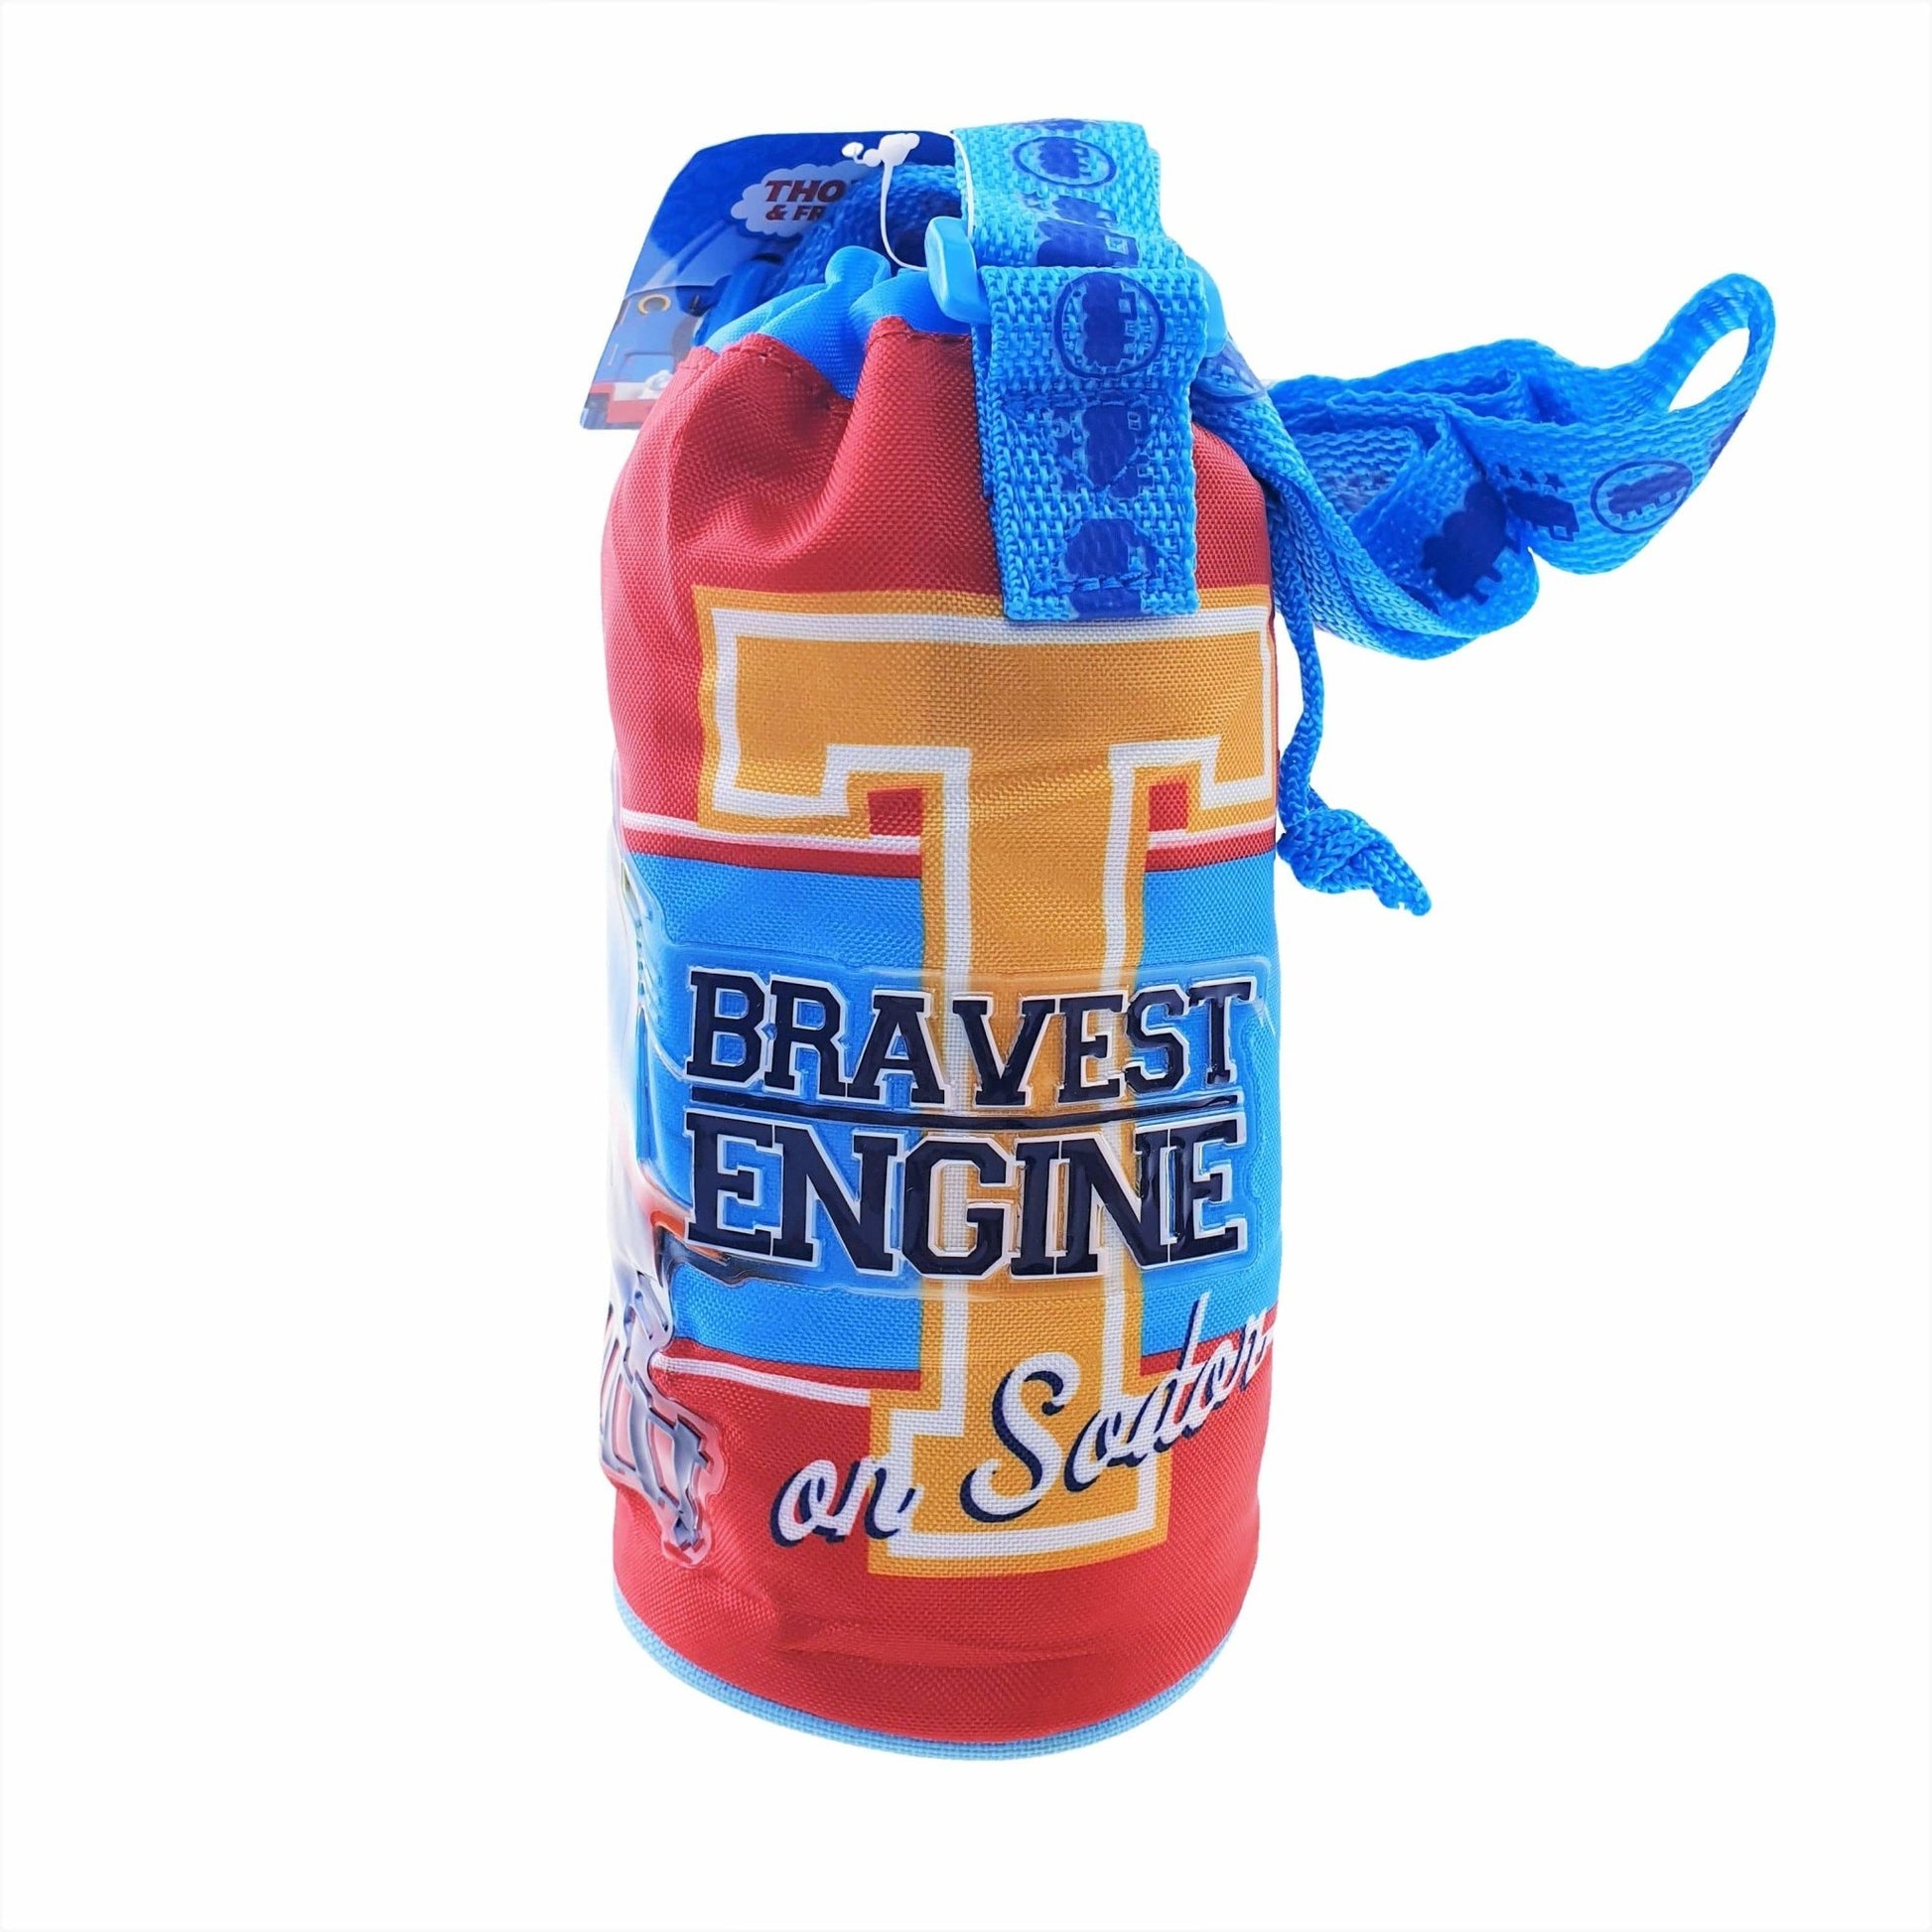 Thomas & Friends - Water Bottle Holder - Simply Life